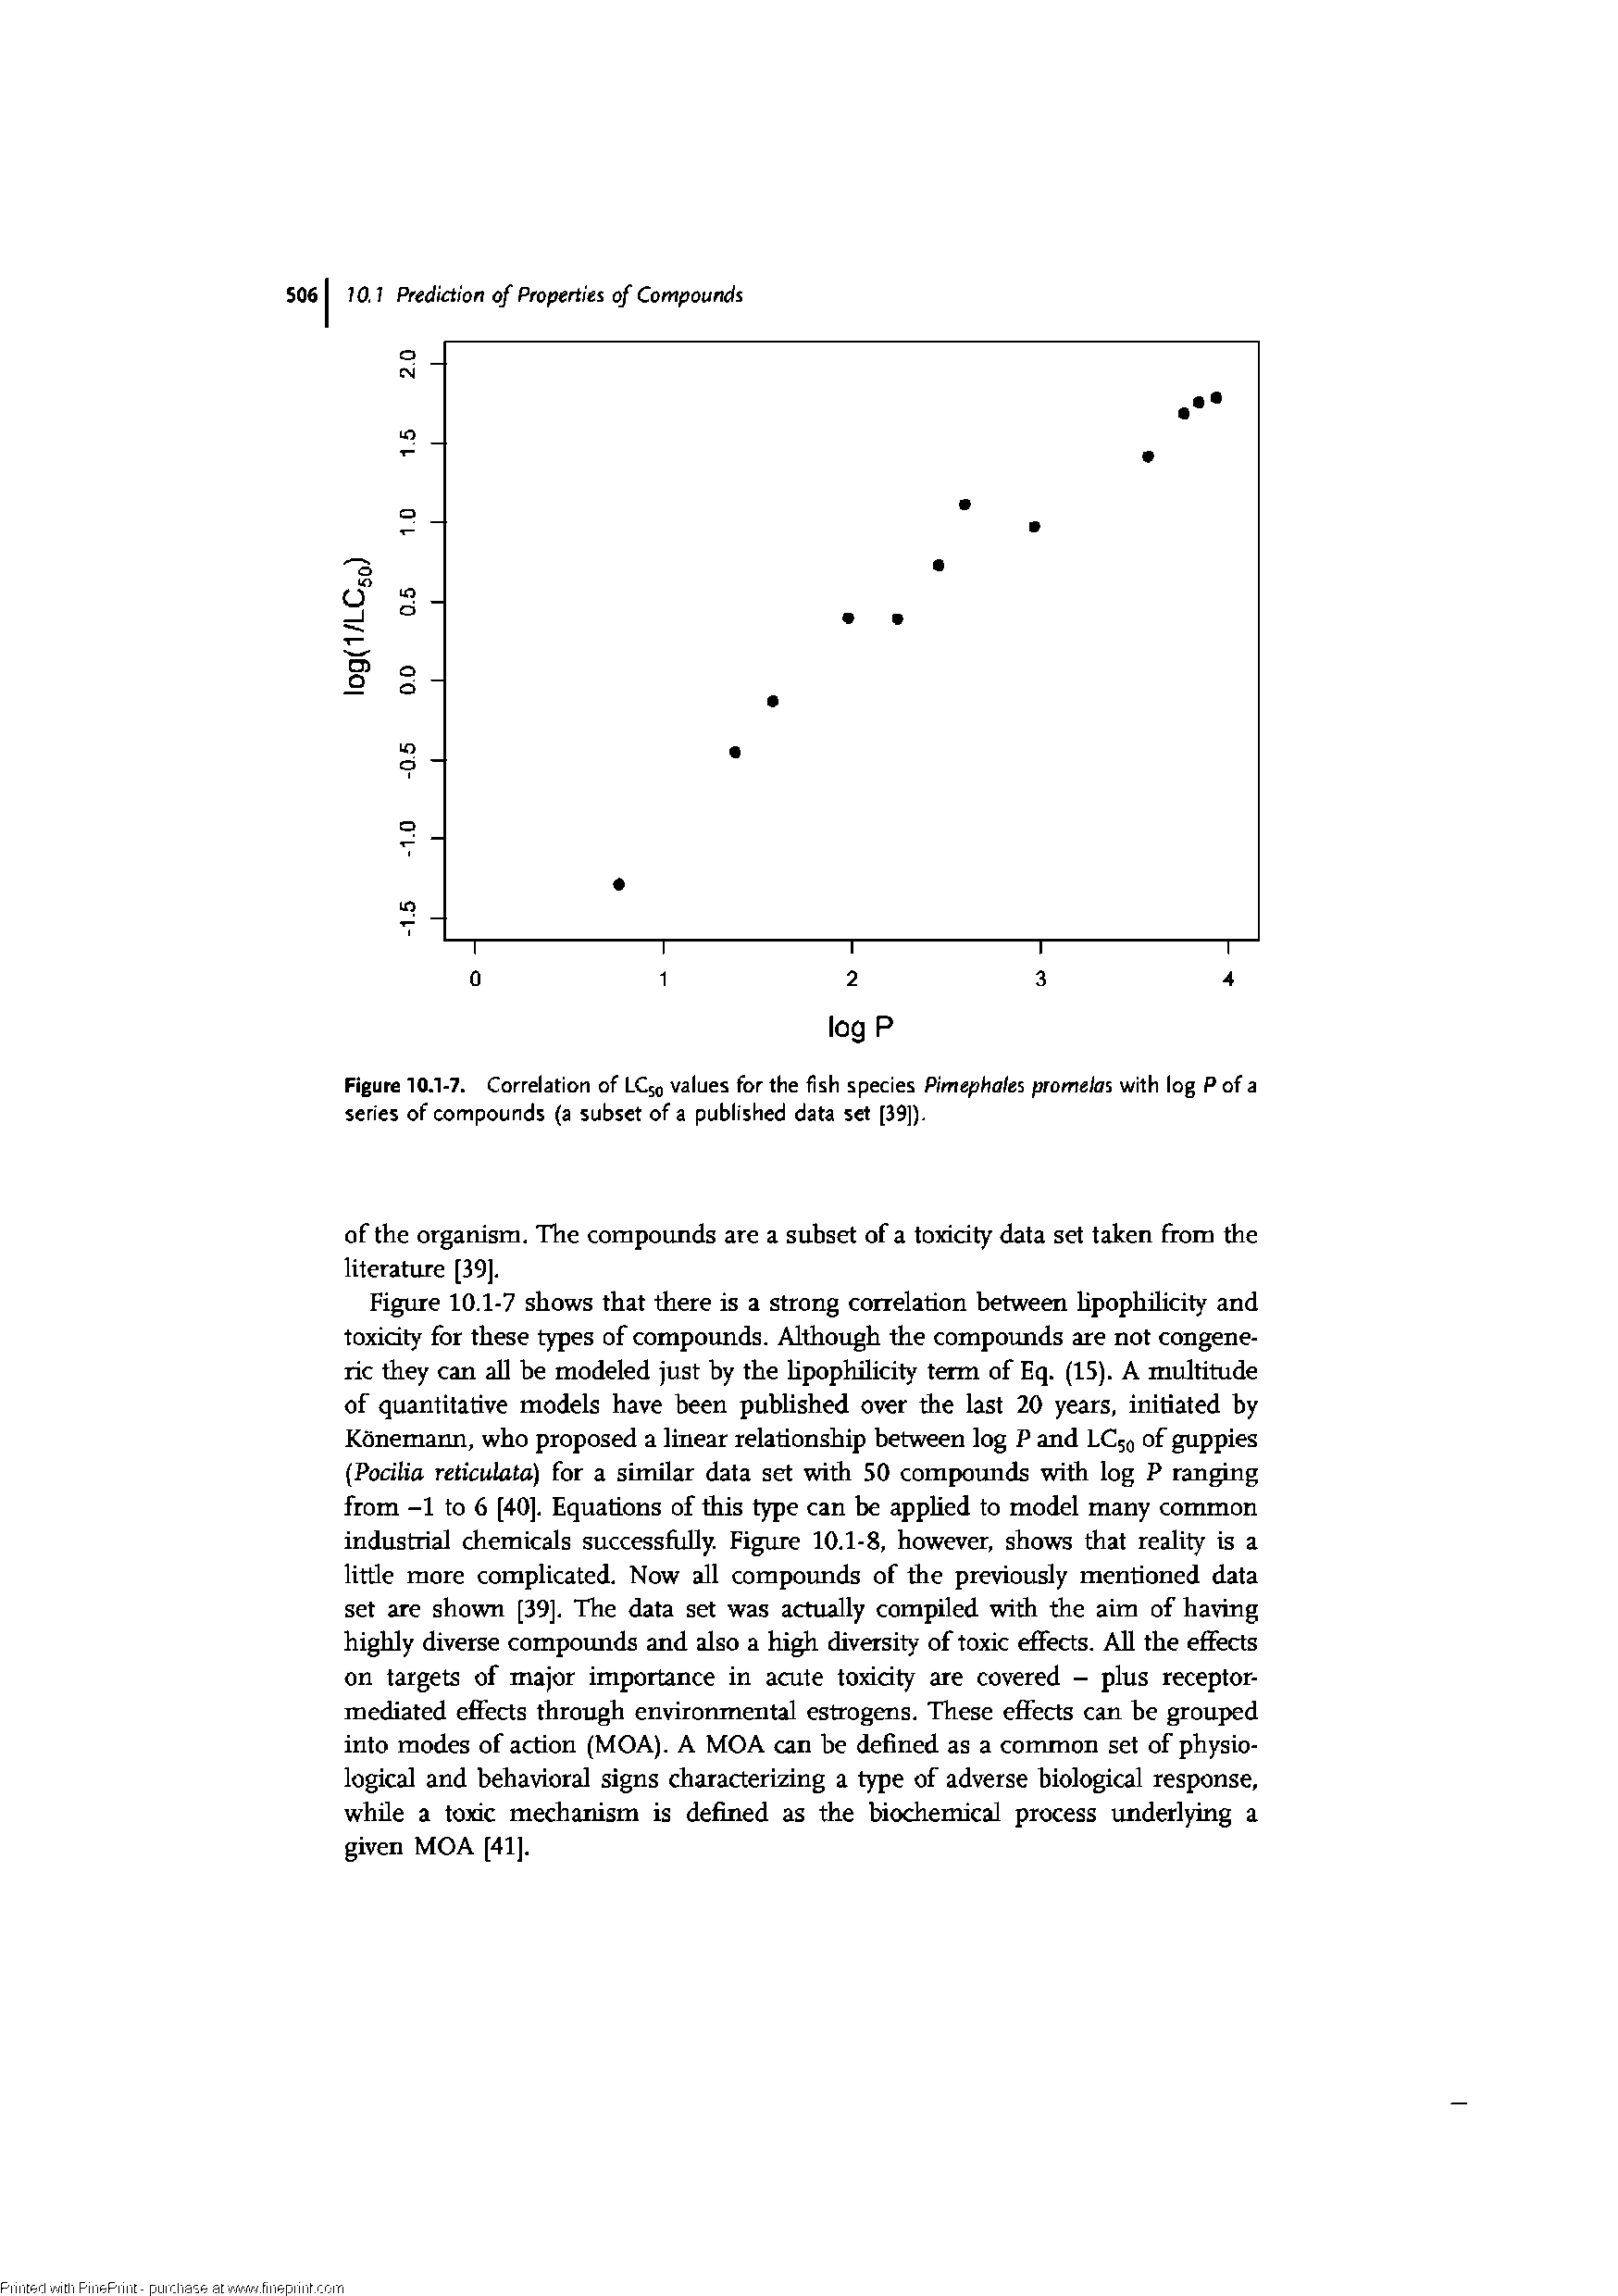 Figure 10.1-7. Correlation of LC50 values for the fish species Pimephales promelas with log P of a series of compounds (a subset of a published data set [39]).